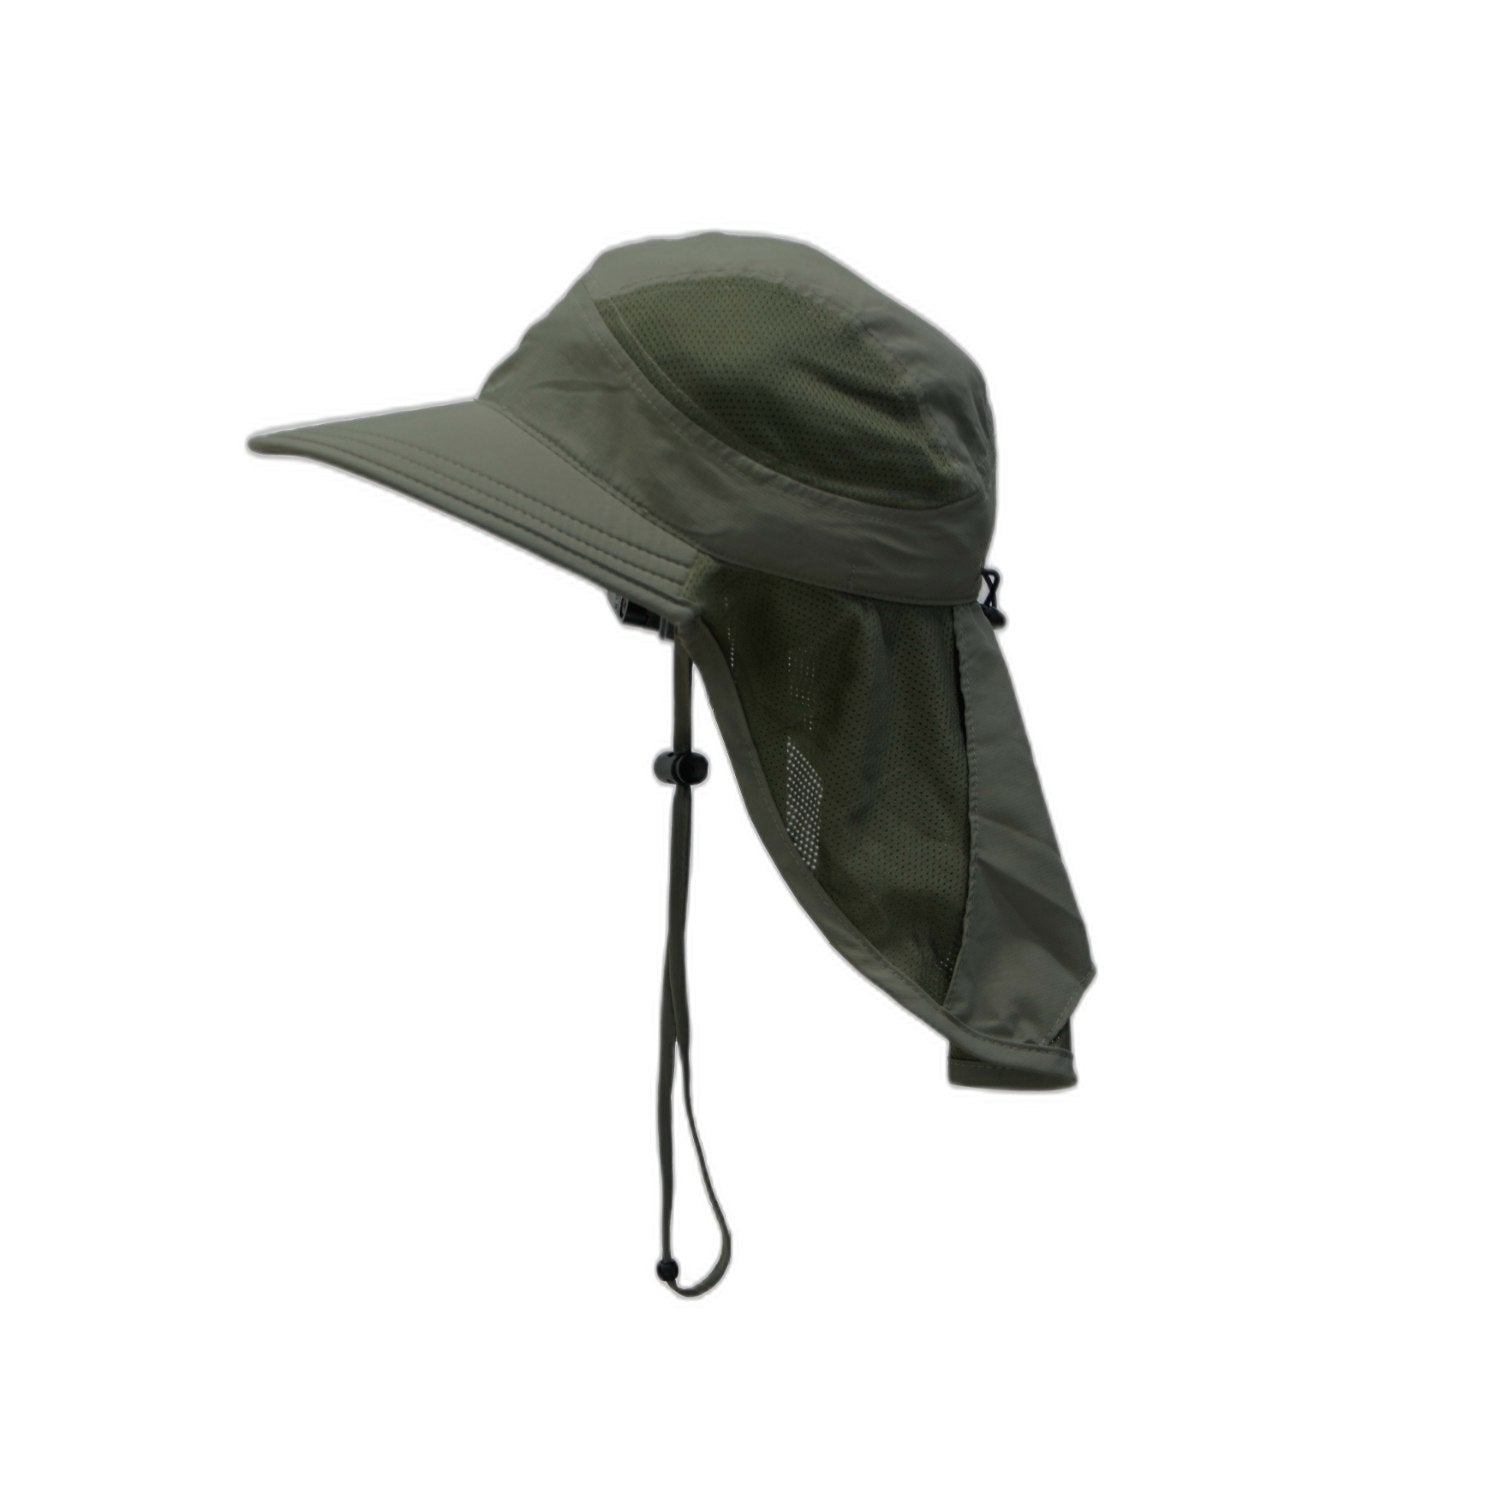 Buy Gokyo Kaza Sun Cap with Neck Cover Olive | Hats at Gokyo Outdoor Clothing & Gear